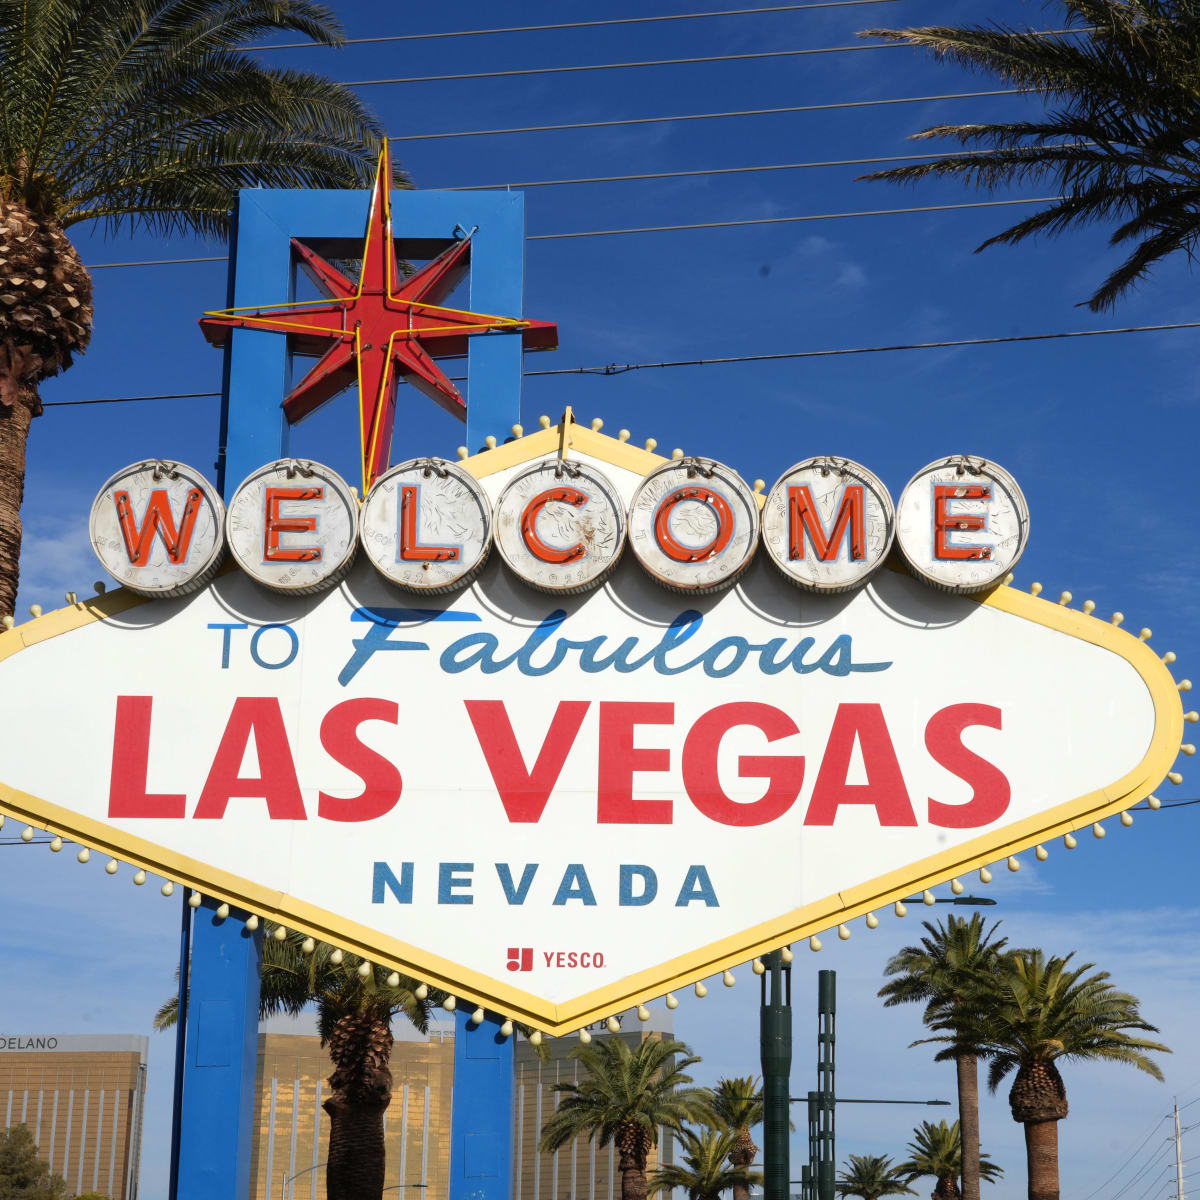 A's pitch plan to move to Las Vegas – The Crusader